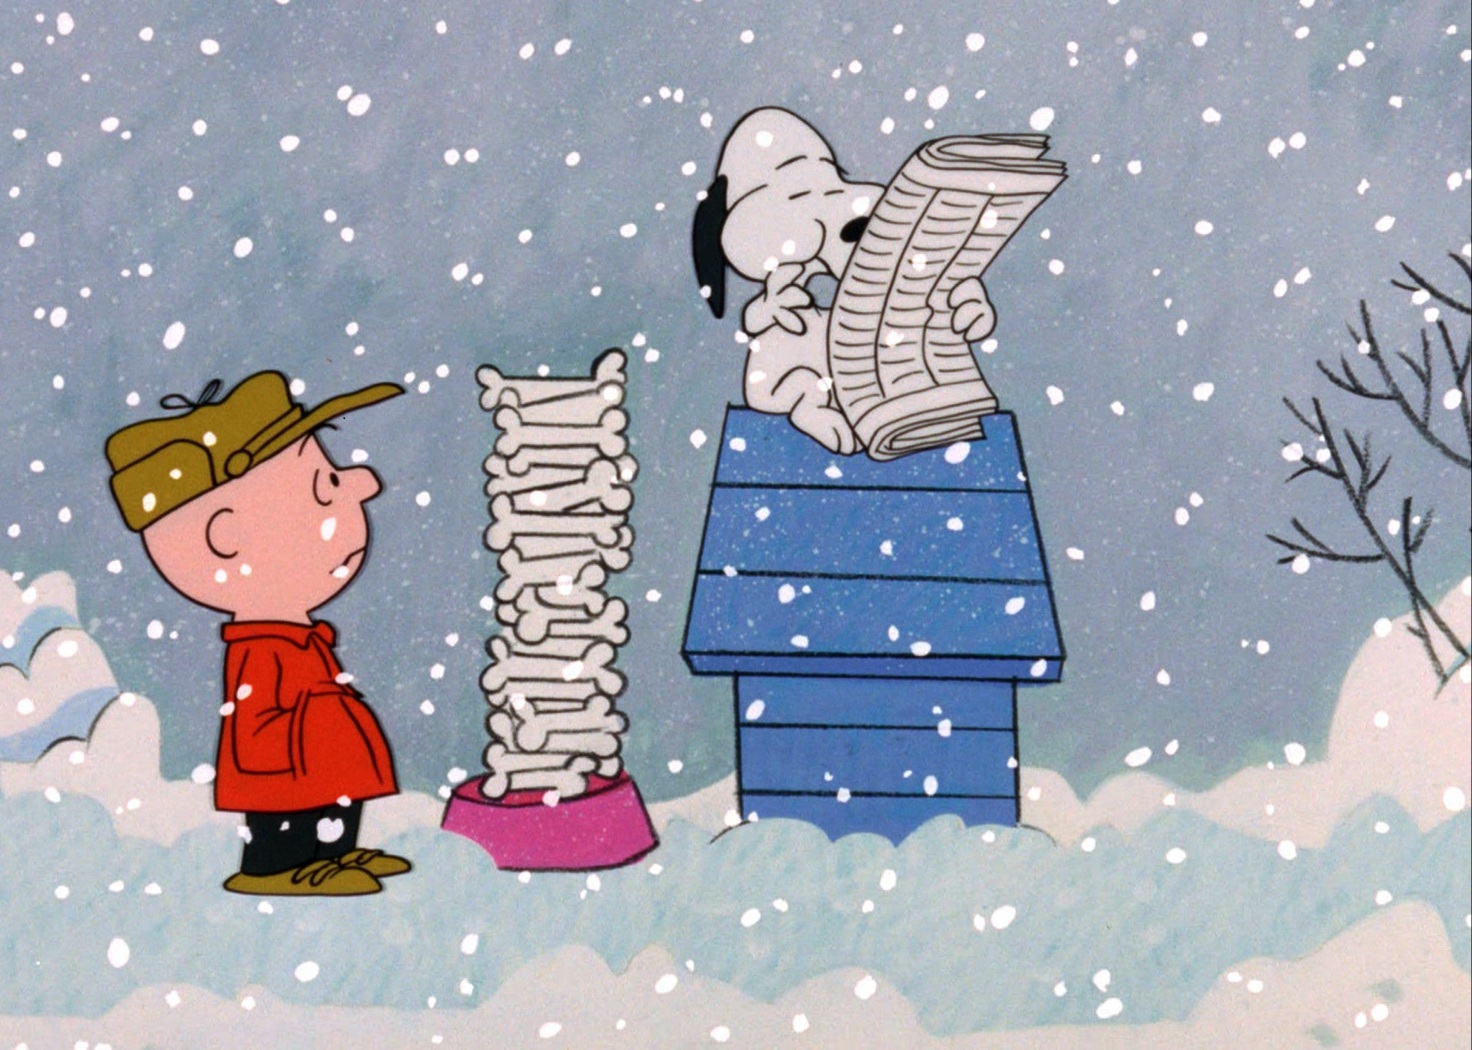 Watch A Charlie Brown Christmas